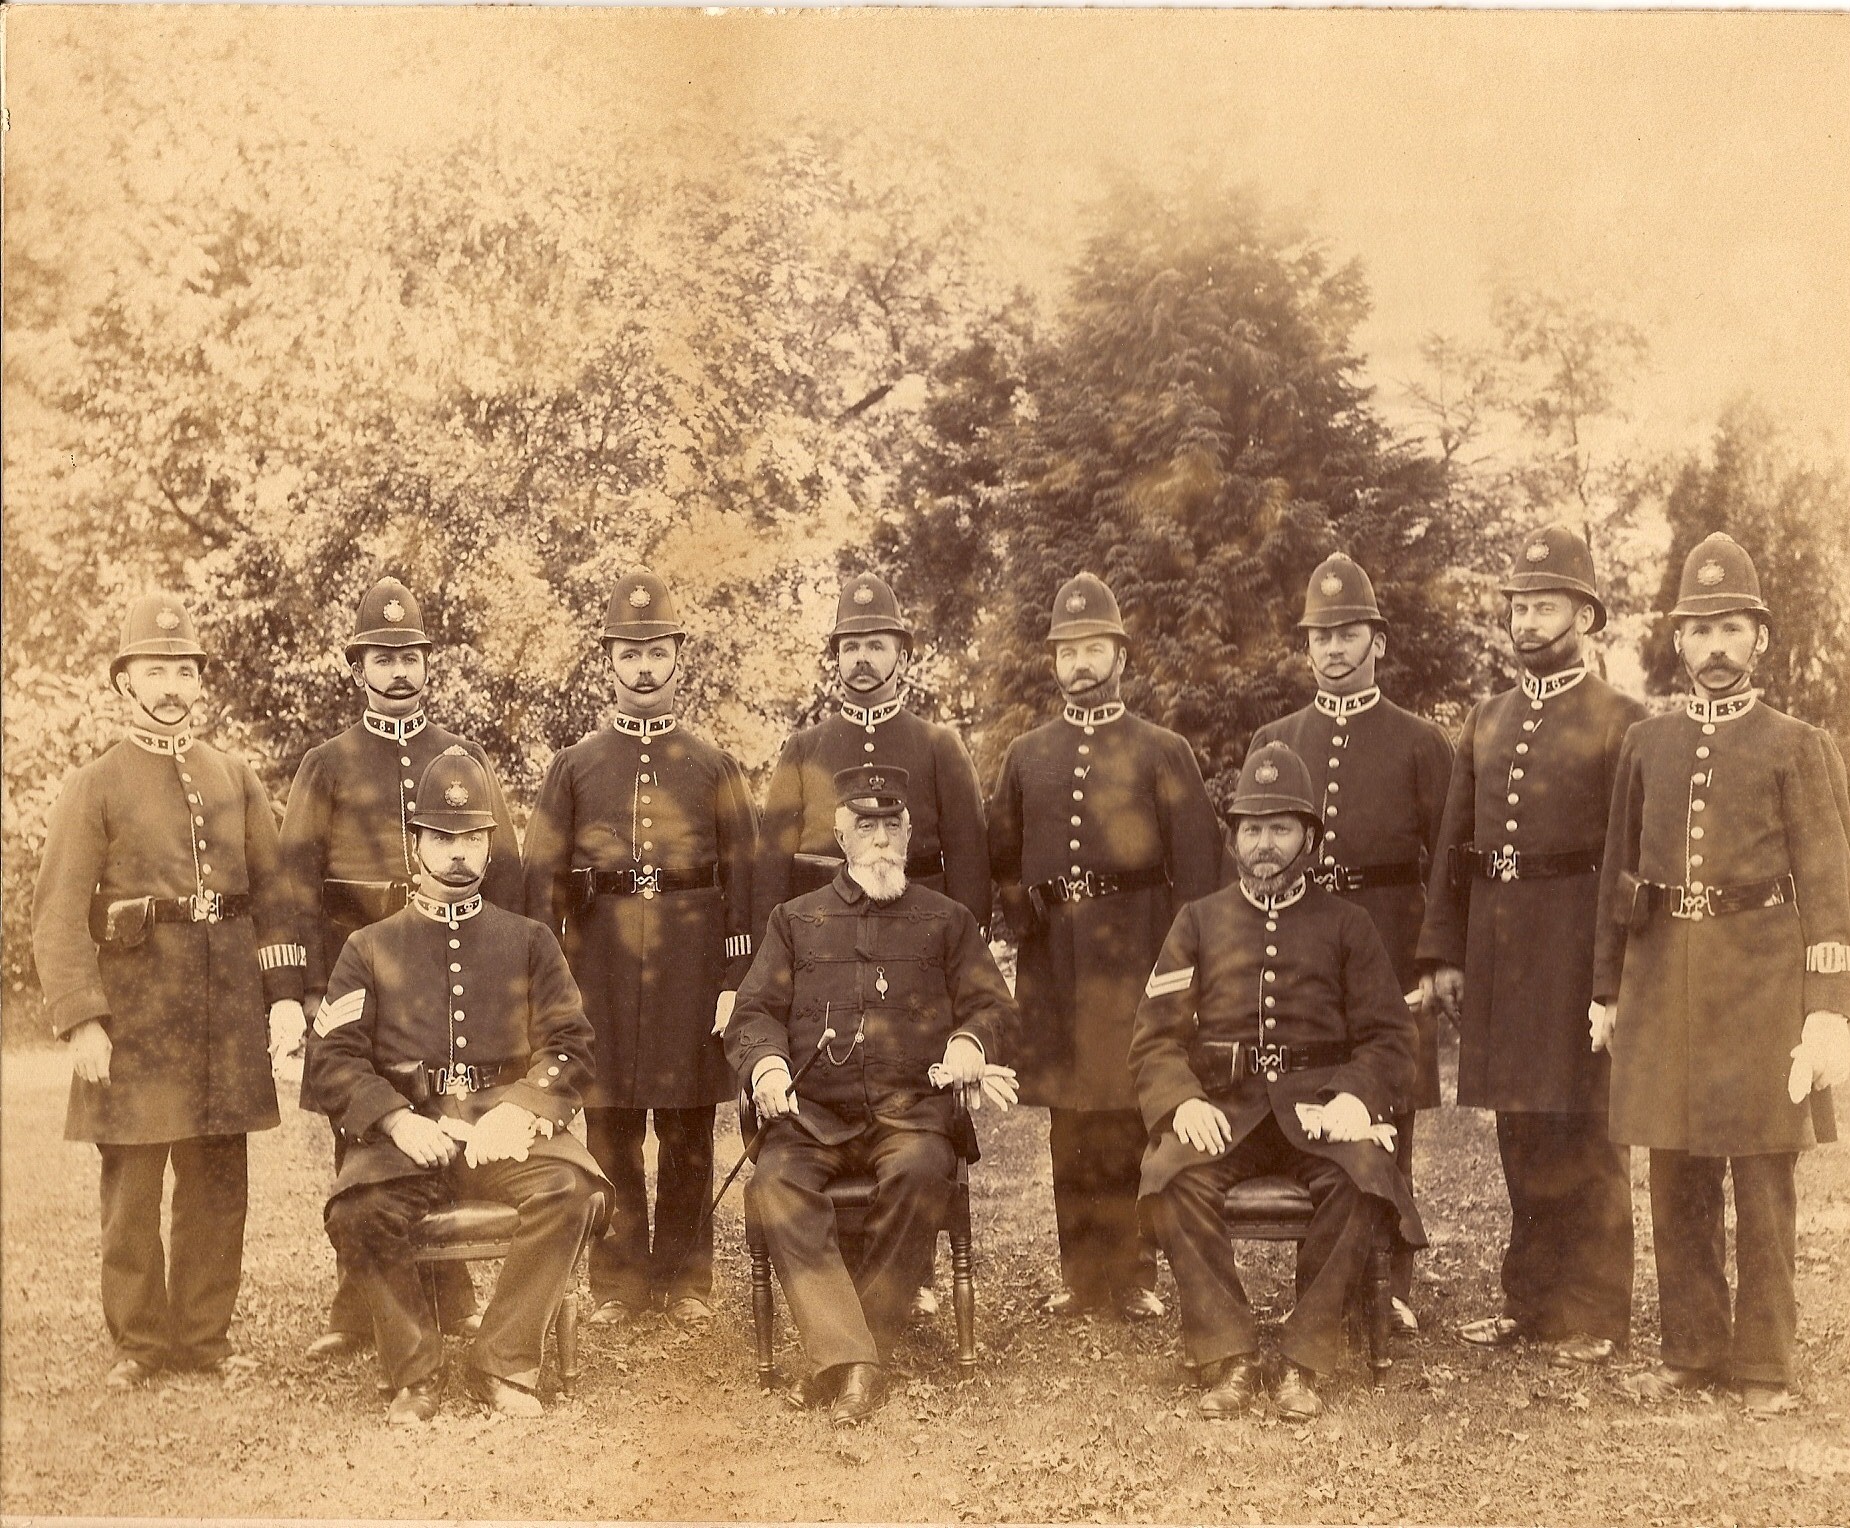 Tiverton Police Force in 1898. A group of men in old fashioned police uniform, some seated some standing.